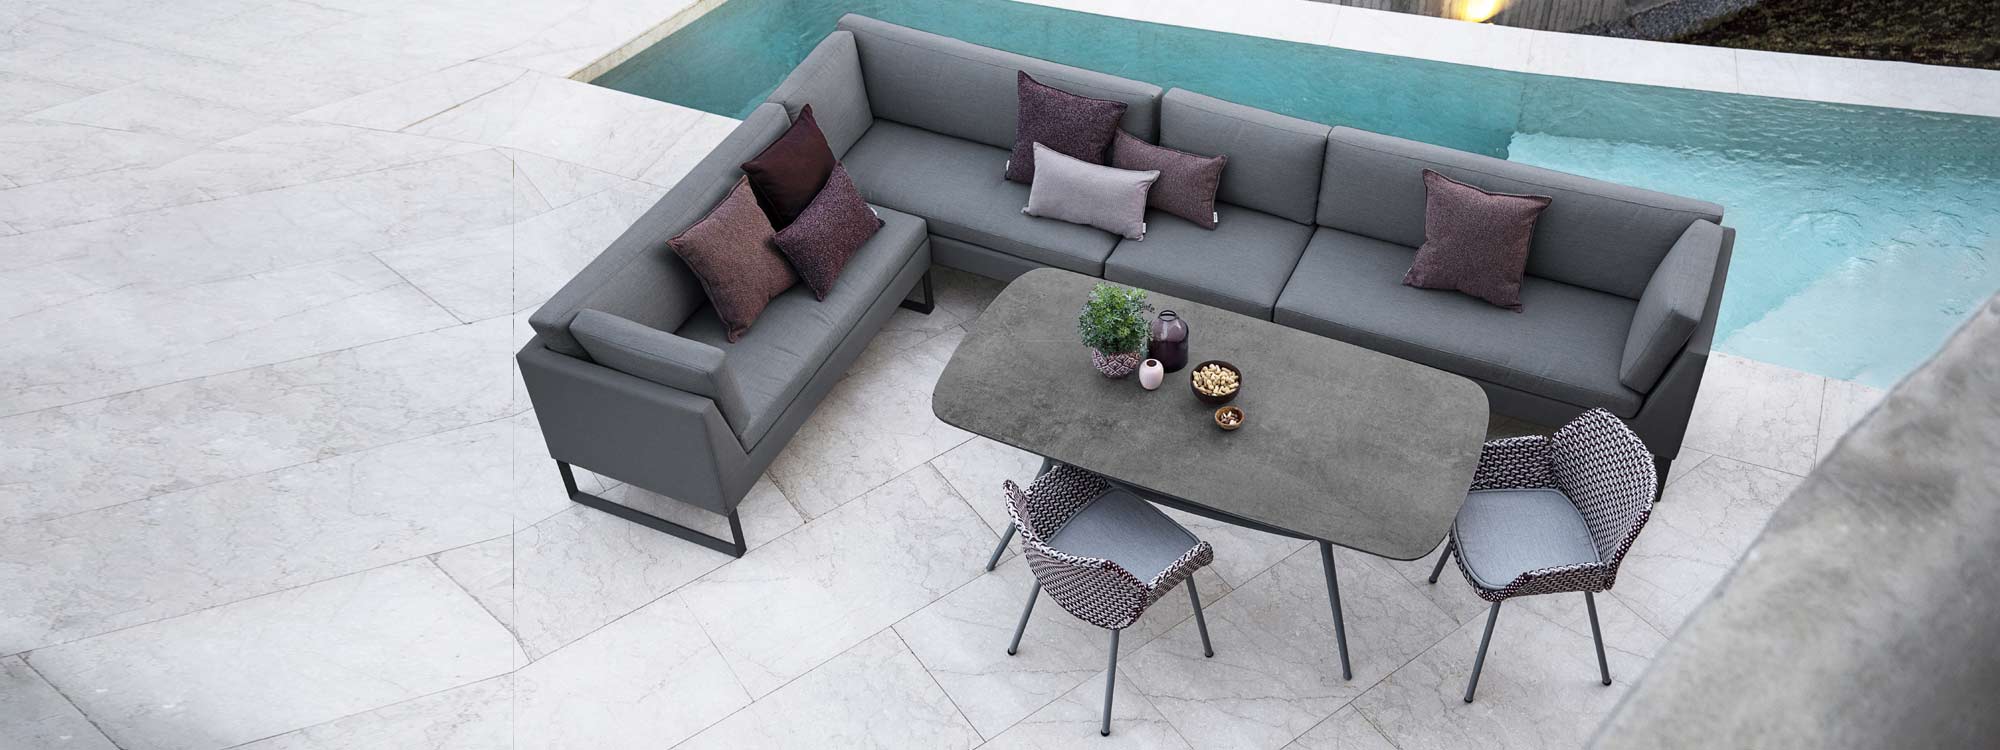 Image of aerial view of Flex garden dining sofa, Joy outdoor table and Vibe rattan chairs by Cane-line